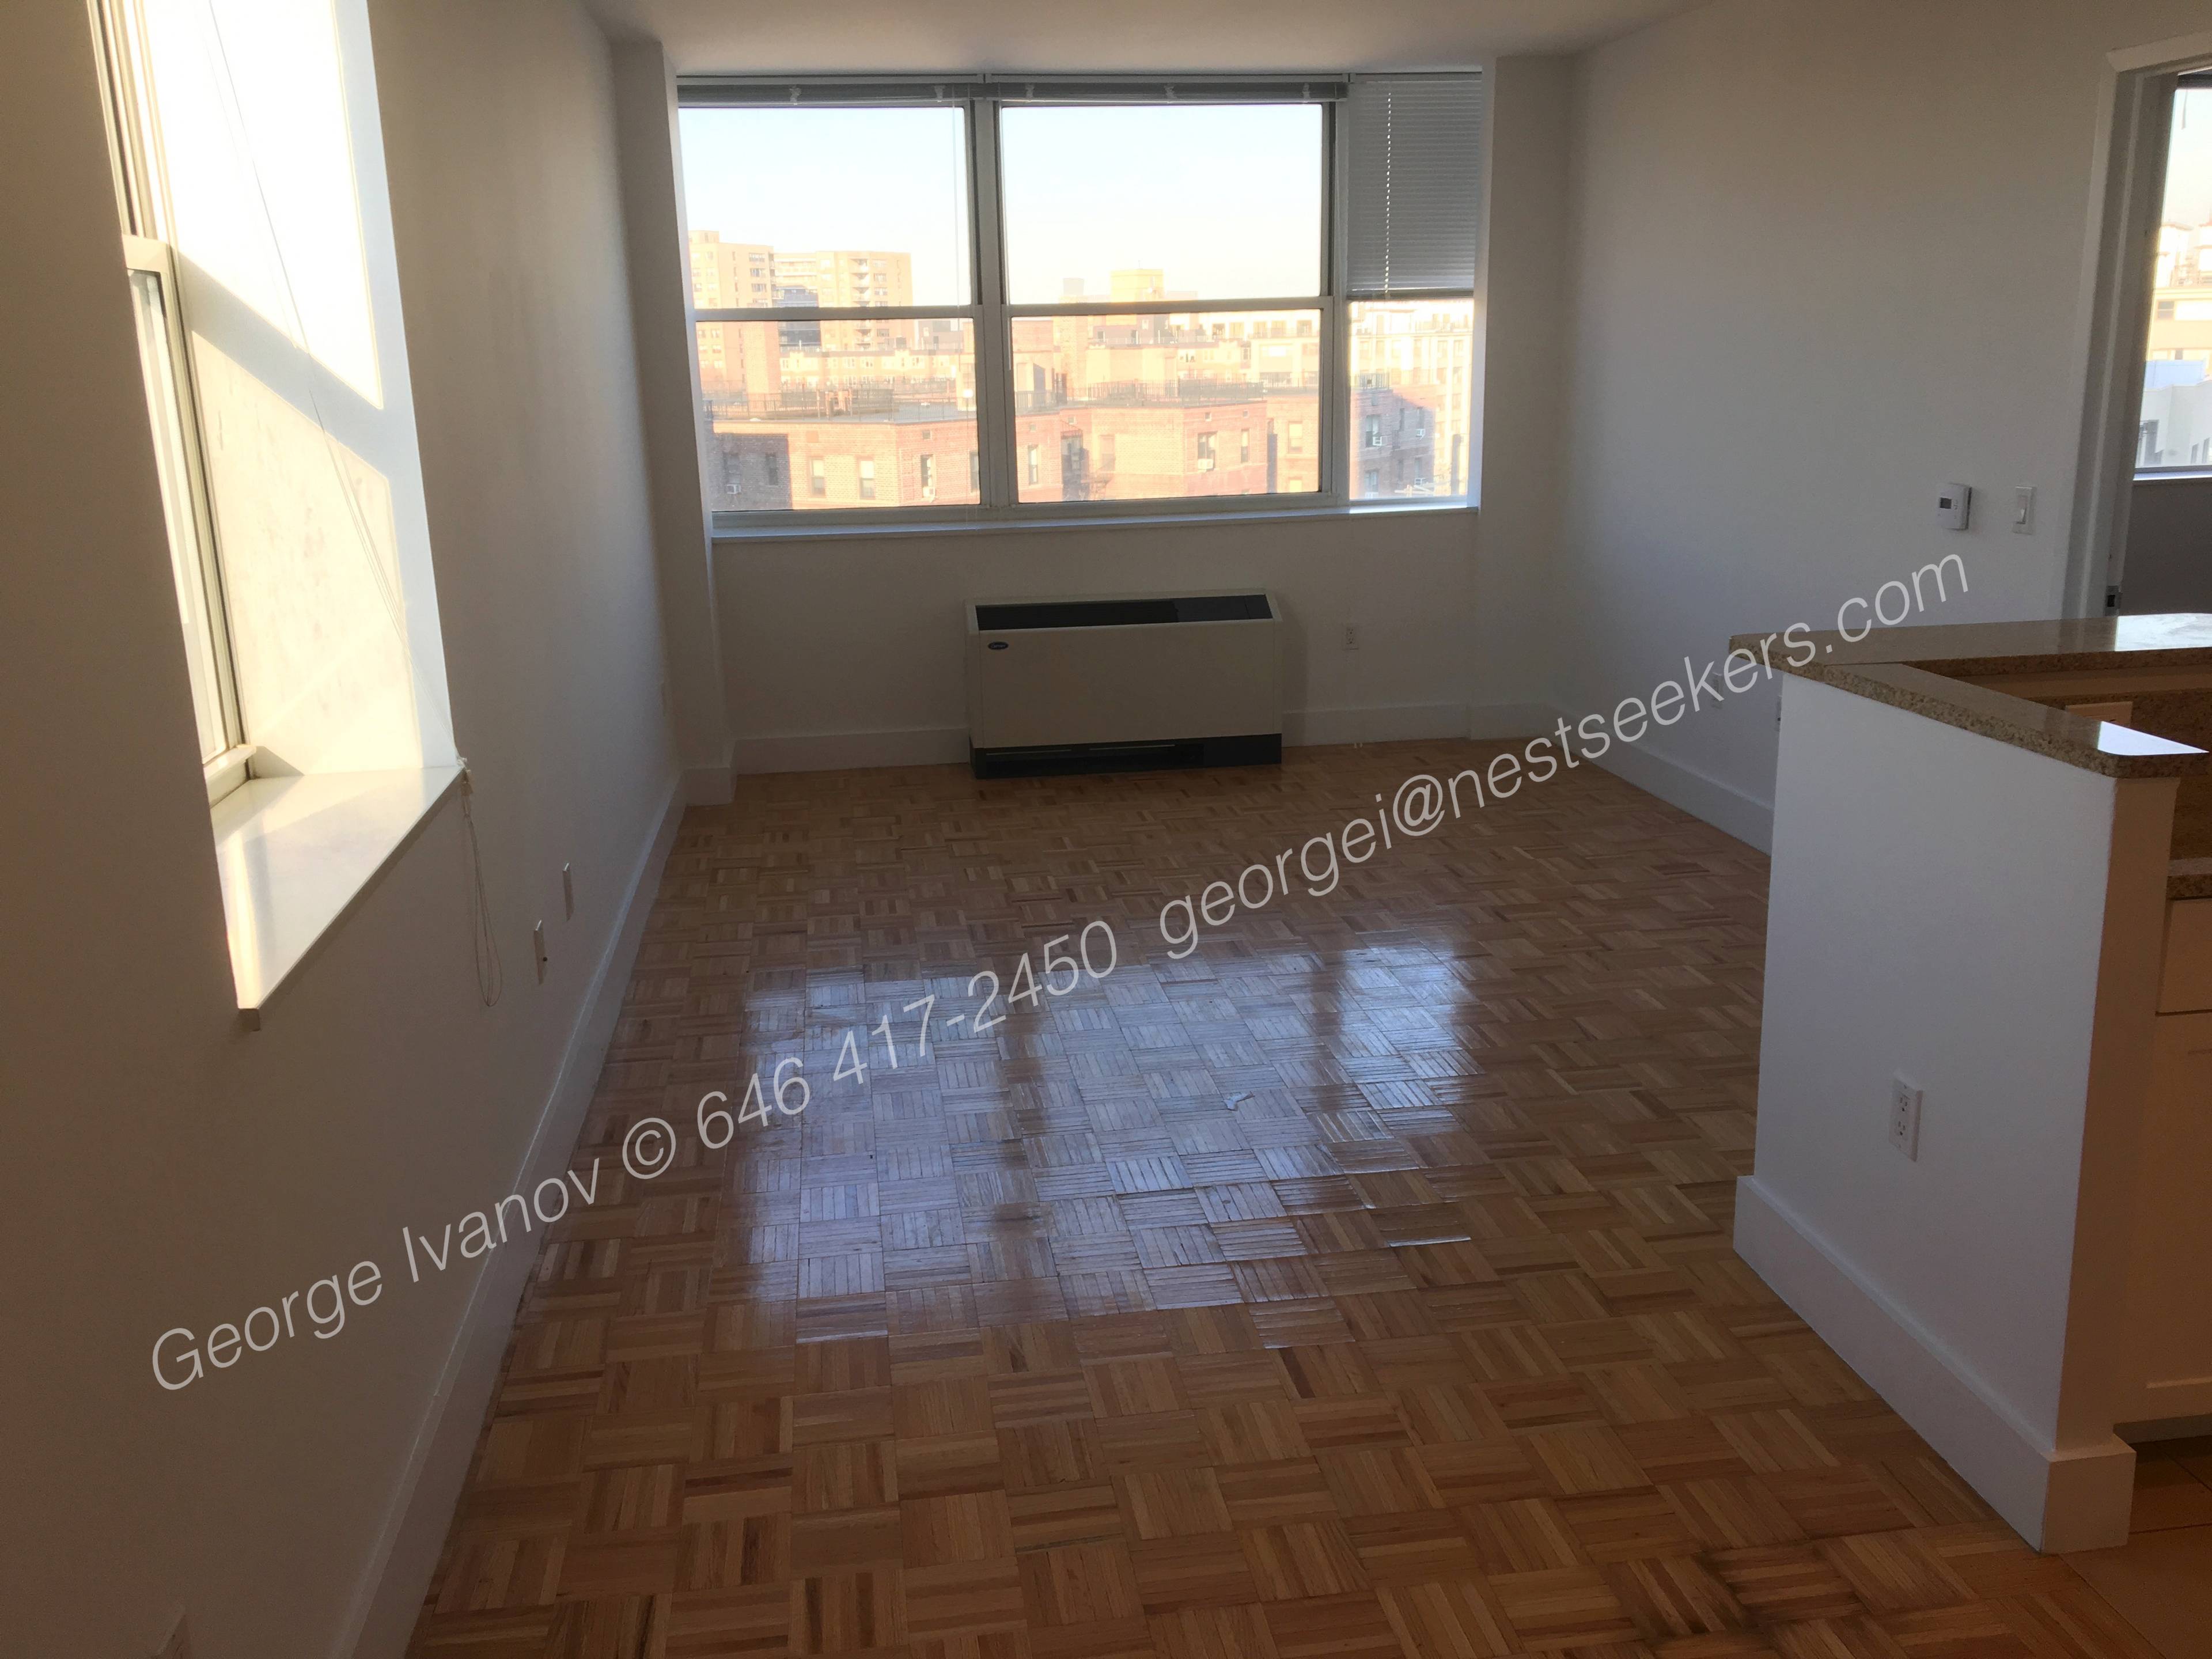 NO FEE- - FREE RENT★★★★  ULTRA LUXURY 1Bed Apartments .  Condo Style Finishes .  Washer & Dryer in UNIT.24Hr Doorman, SPECTACULAR AMENETIES. 5 min to MIdtown Manhattan